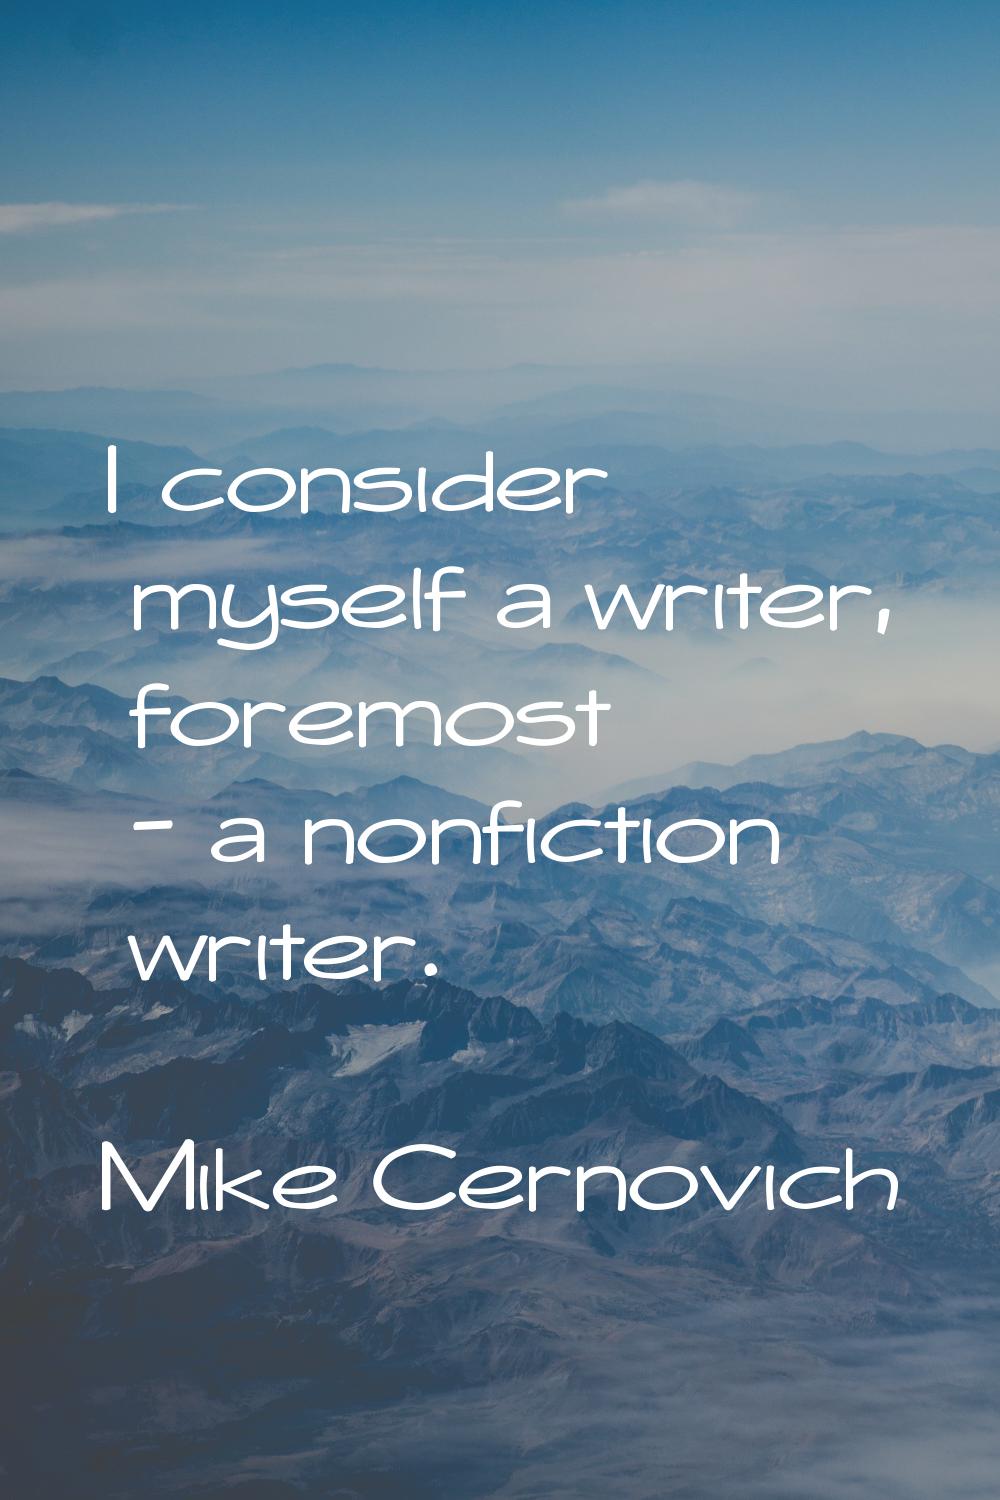 I consider myself a writer, foremost - a nonfiction writer.